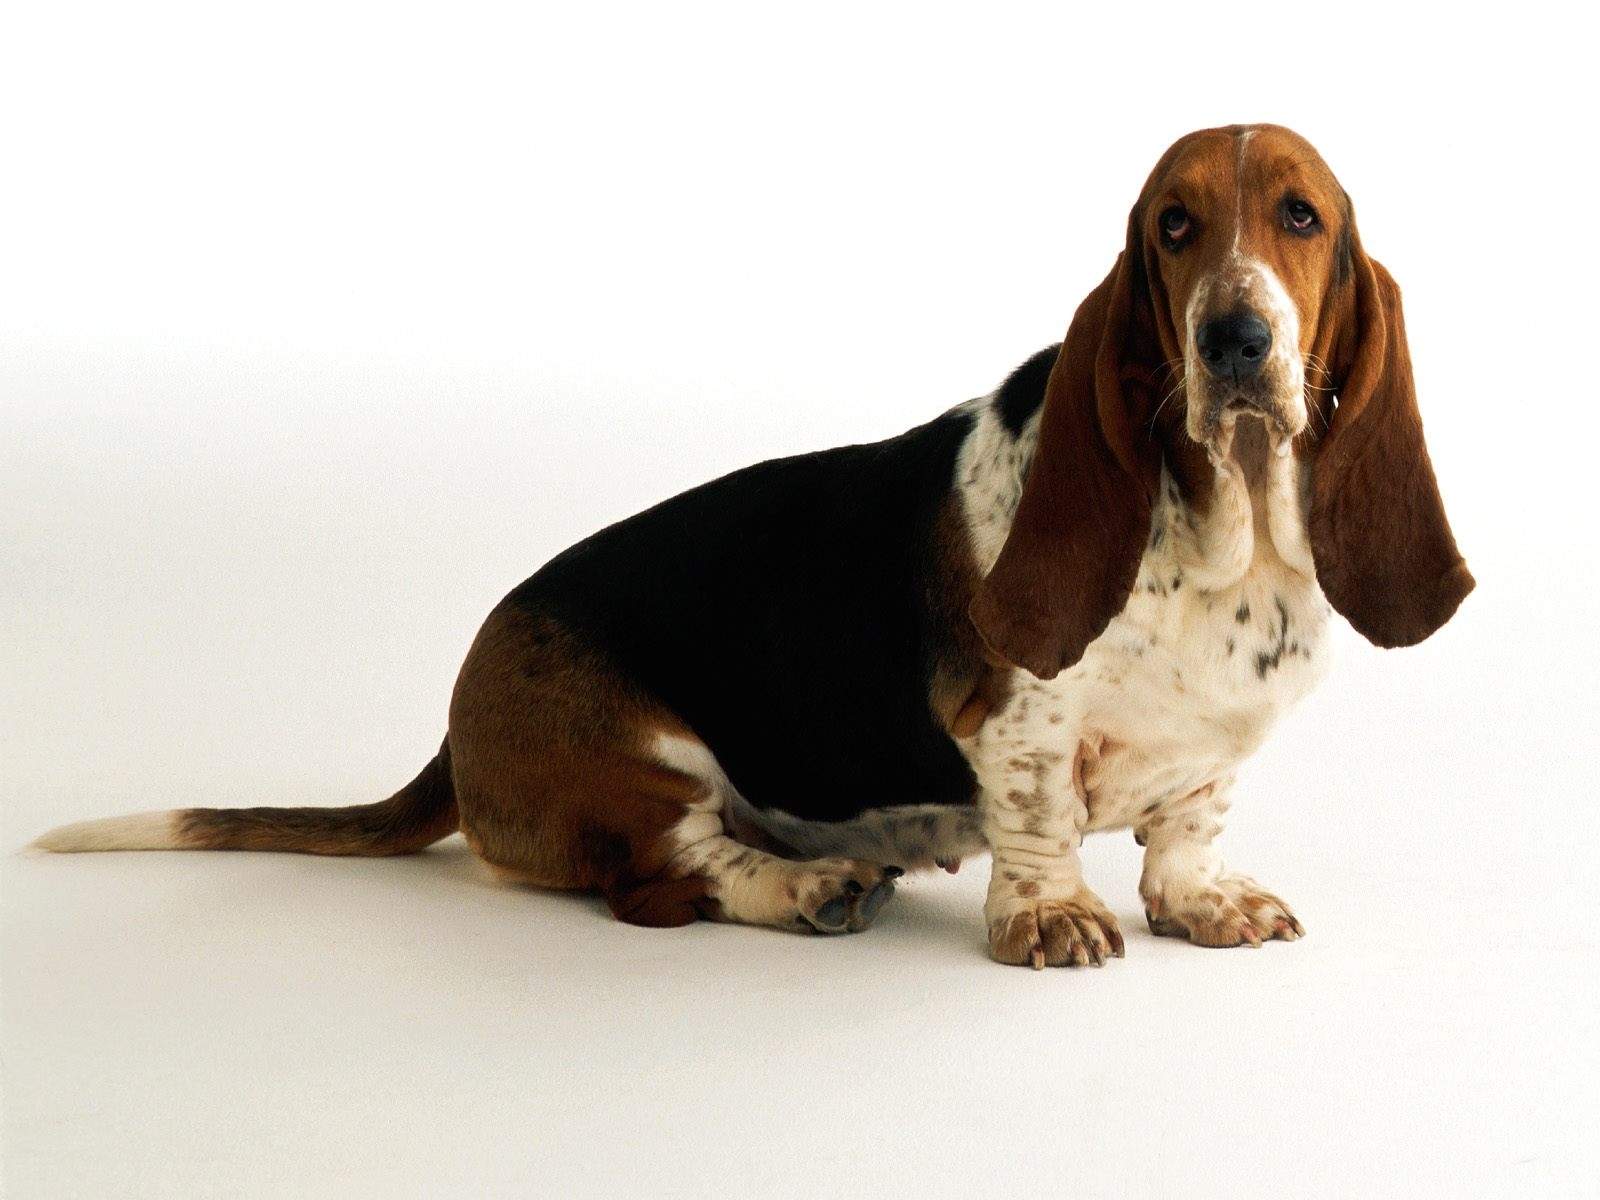 anal gland care for basset hound